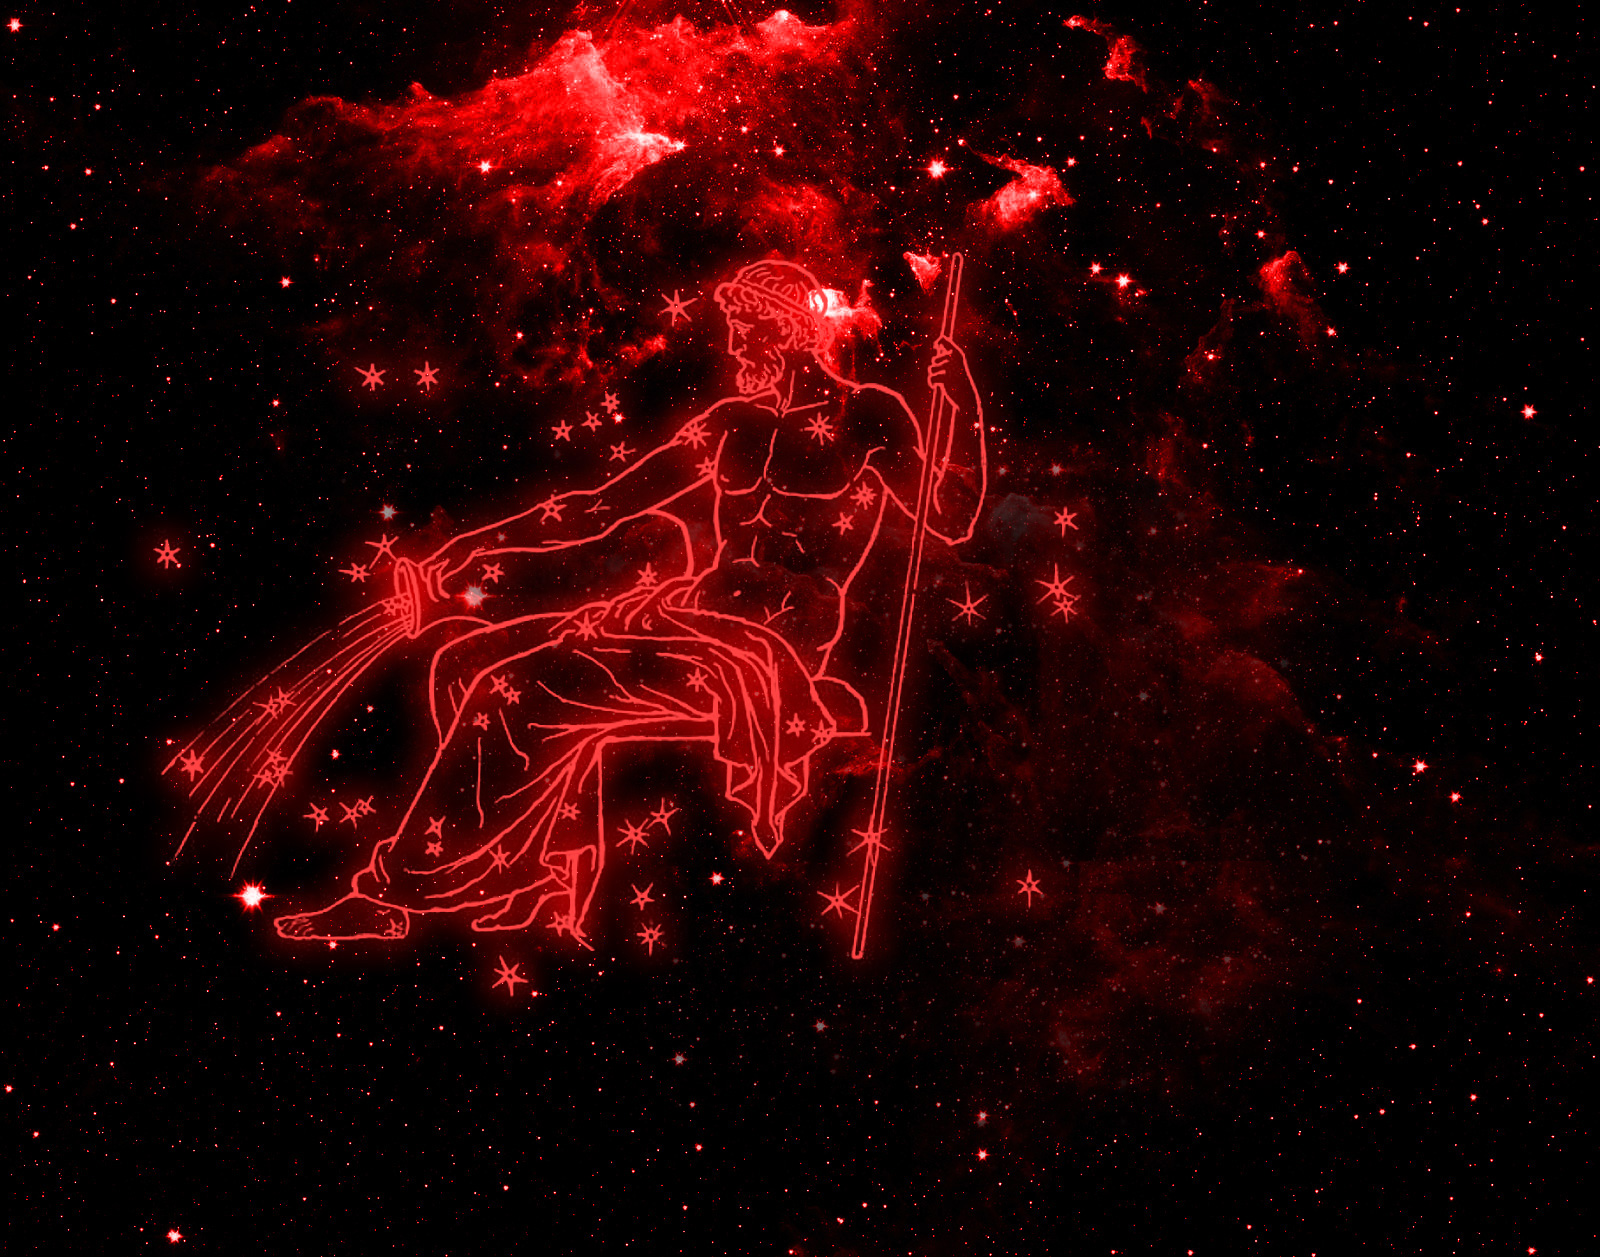 A red and black image of the constellation - Cancer